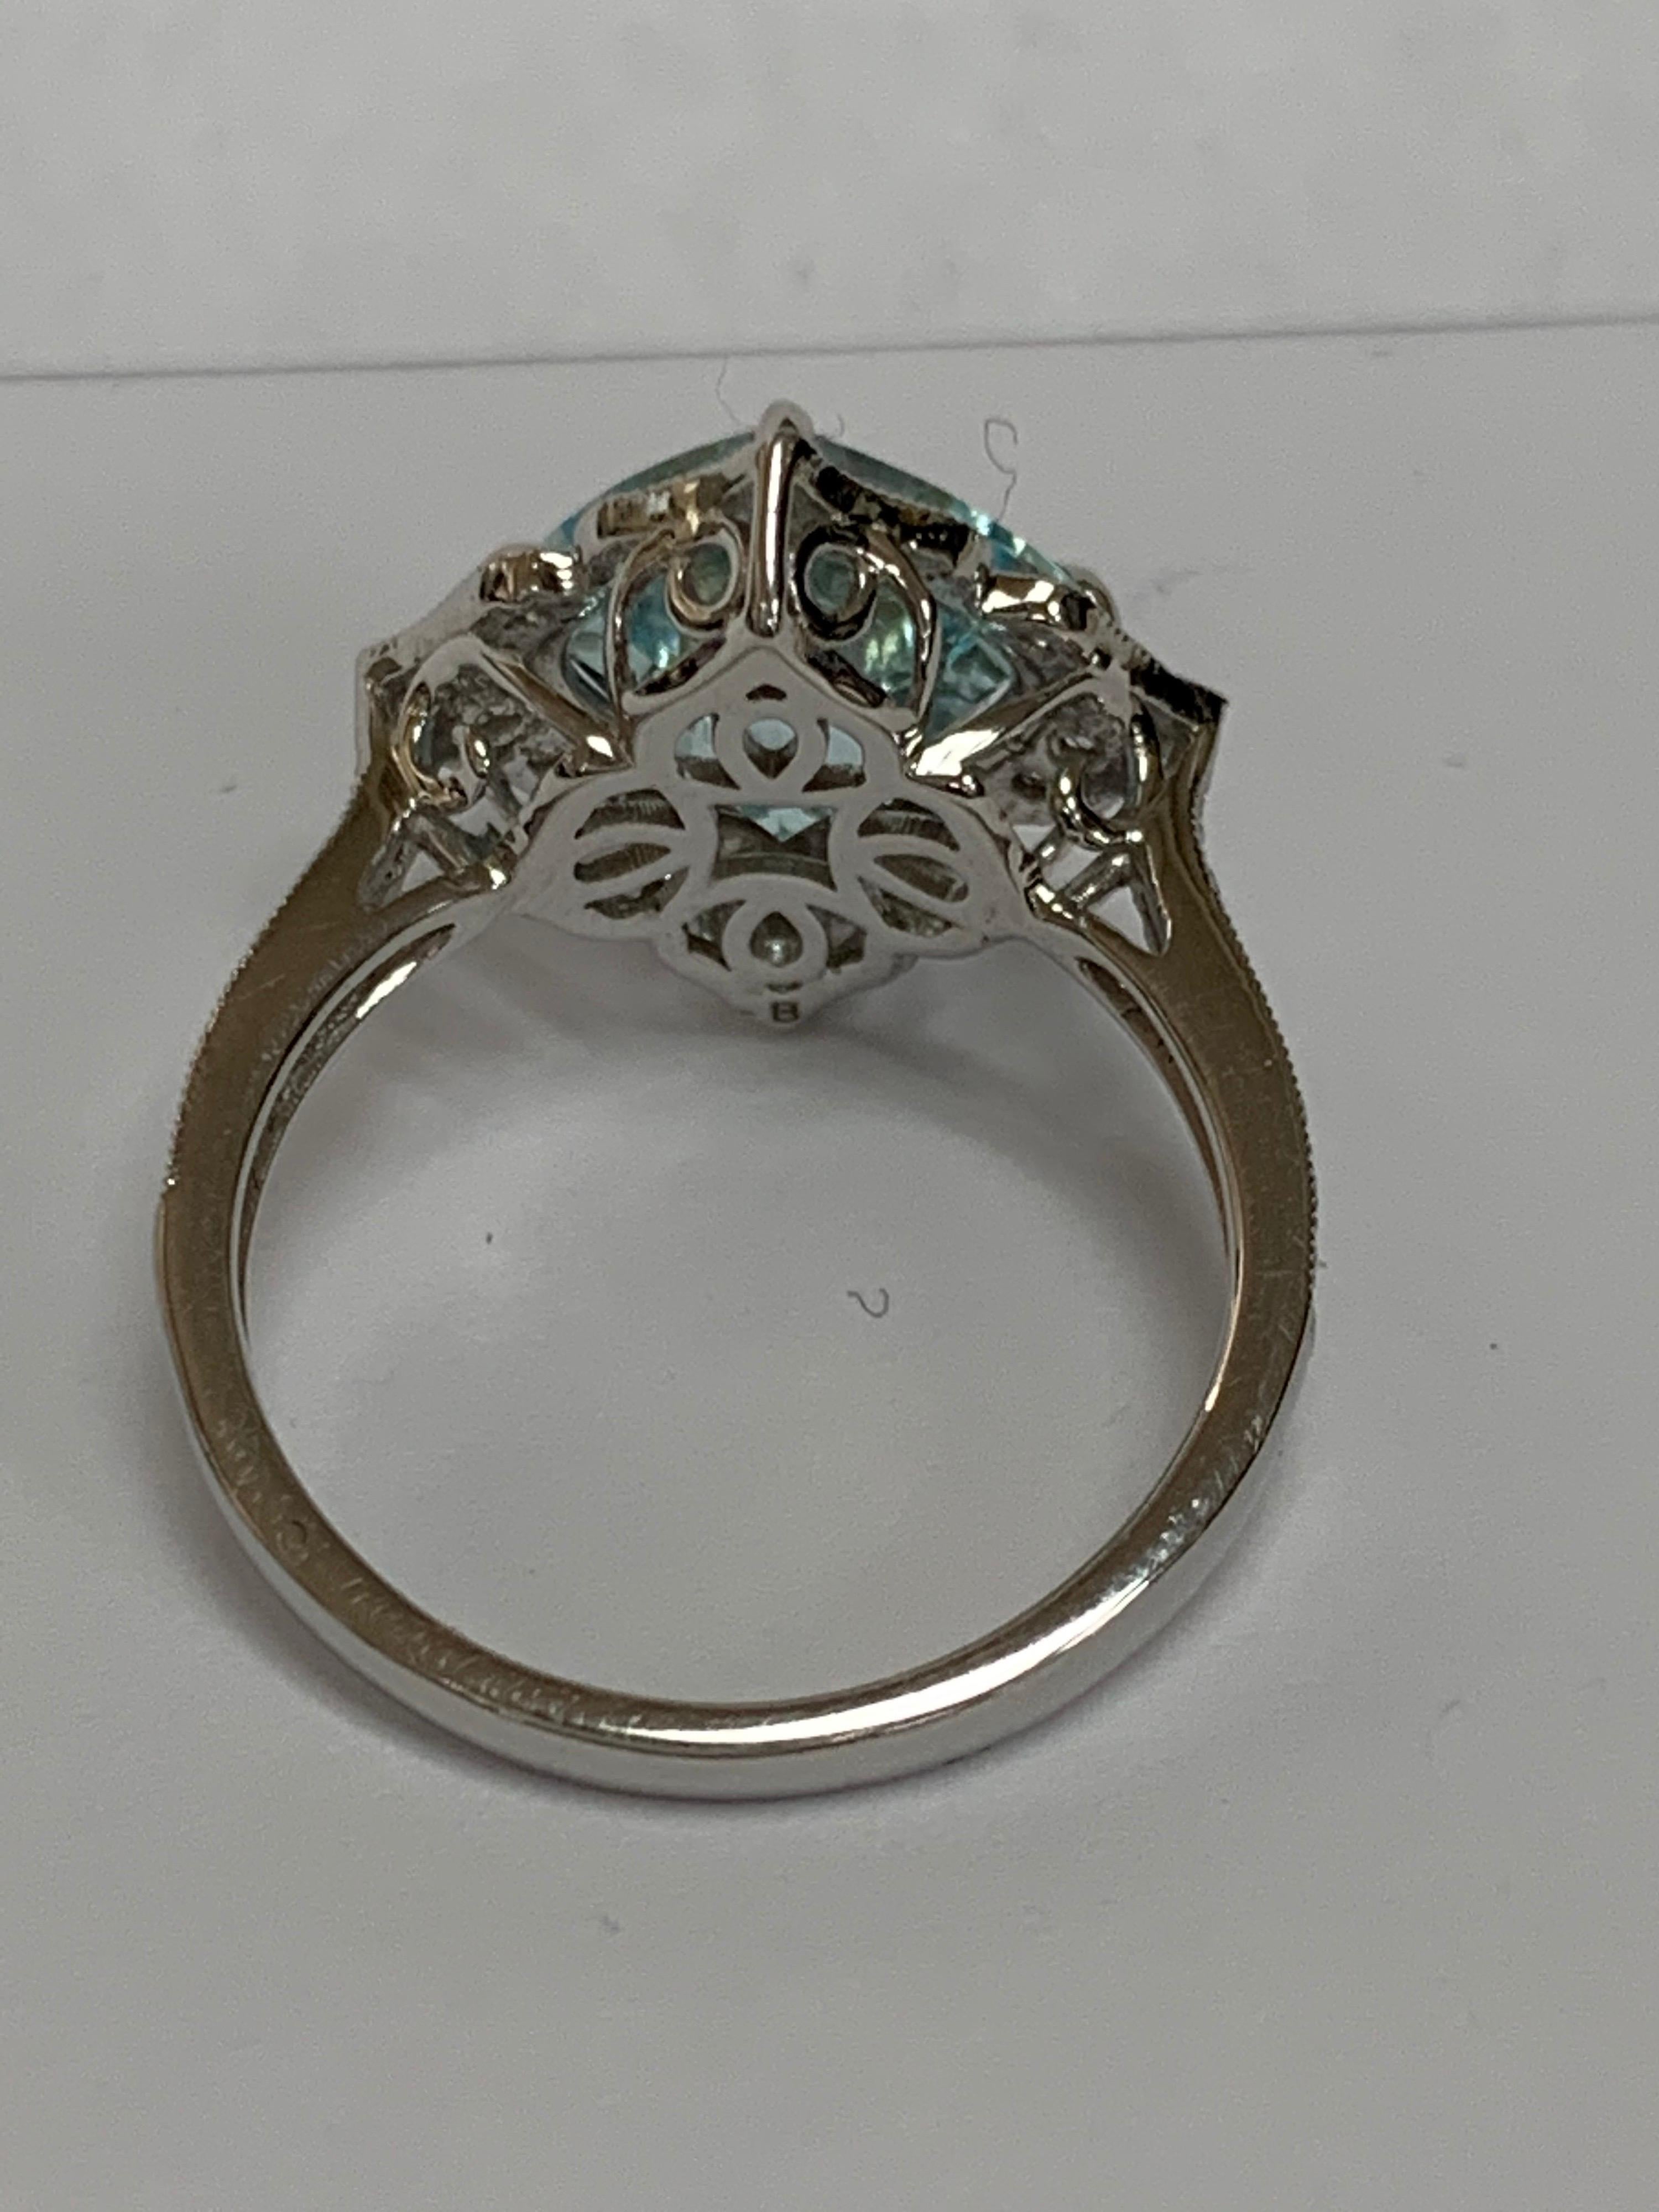 Natural Cushion cut beautiful aquamarine with 0.31 Carat round diamonds accents set in 14 Karat white gold is one of a kind handcrafted Ring, Size of the ring is 7 and can be resized if needed.